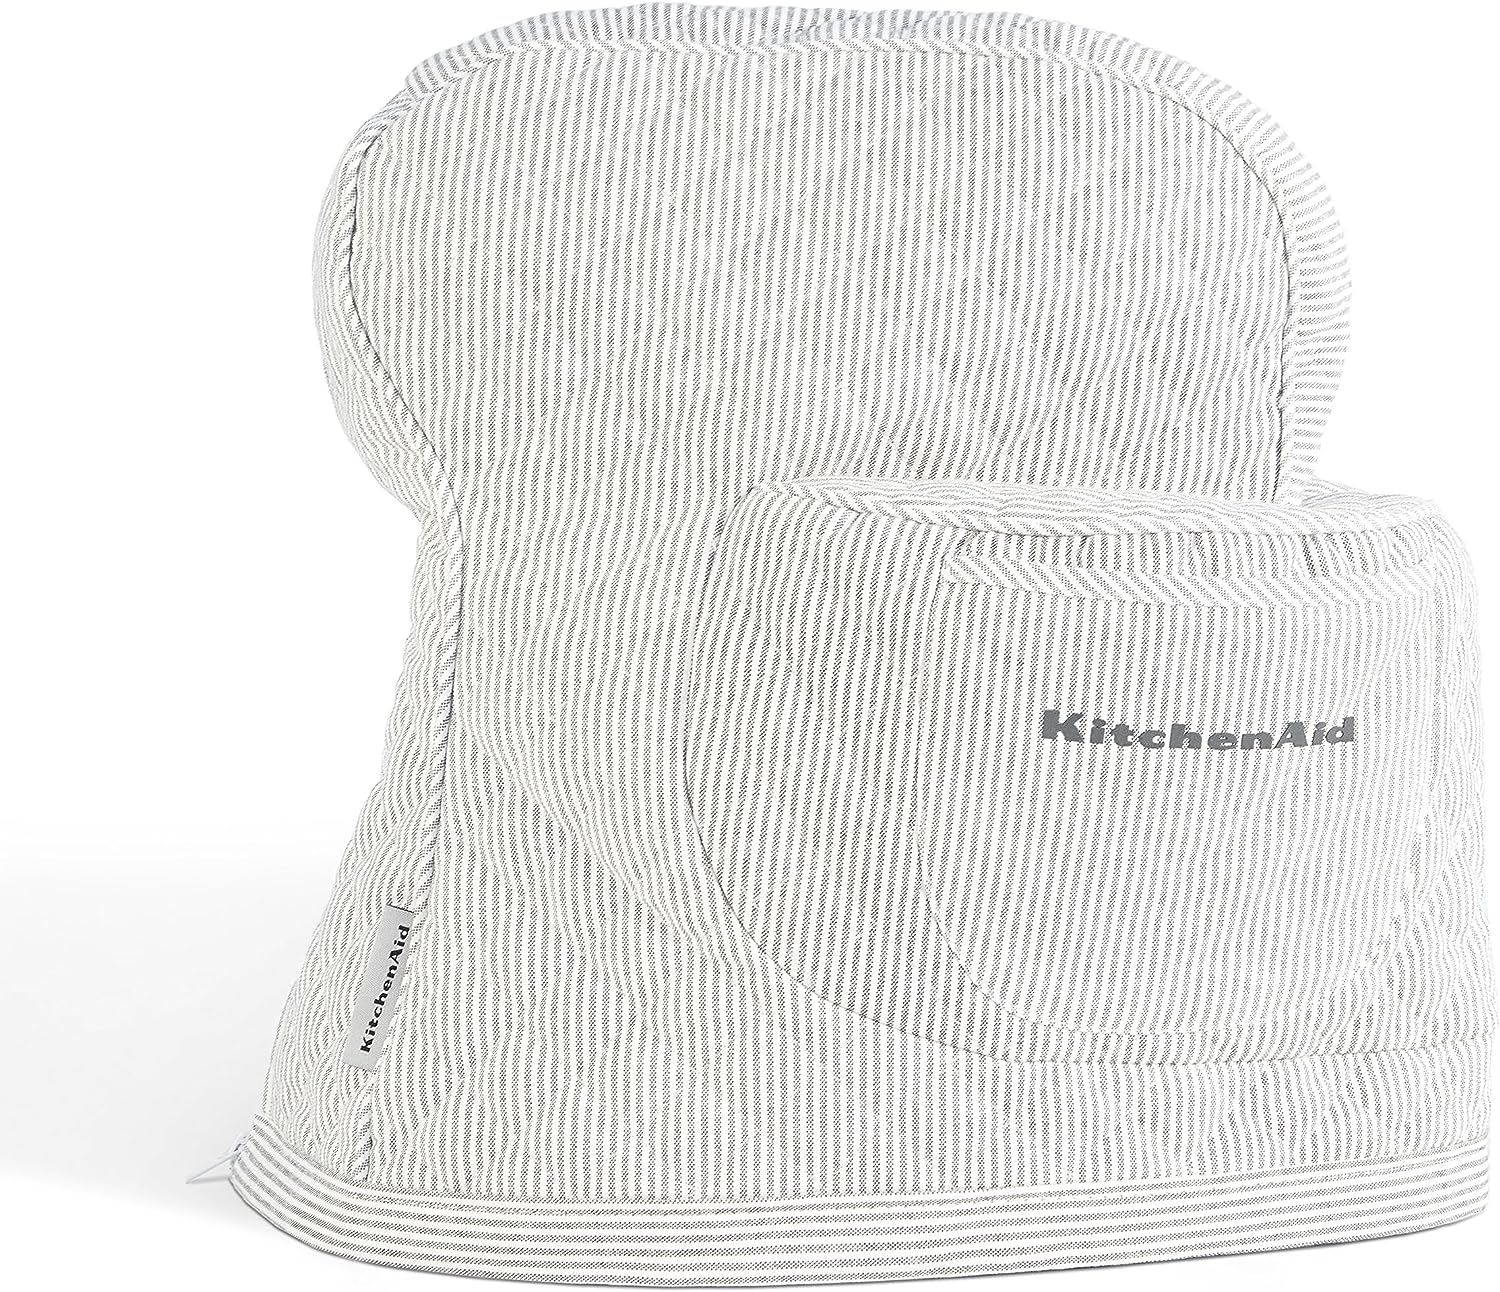 Kitchenaid 100% Cotton Quilted Tilt Head Mixer Cover With Storage Bag 14.5 \ "X 18 \" X 10 \ "Charcoal